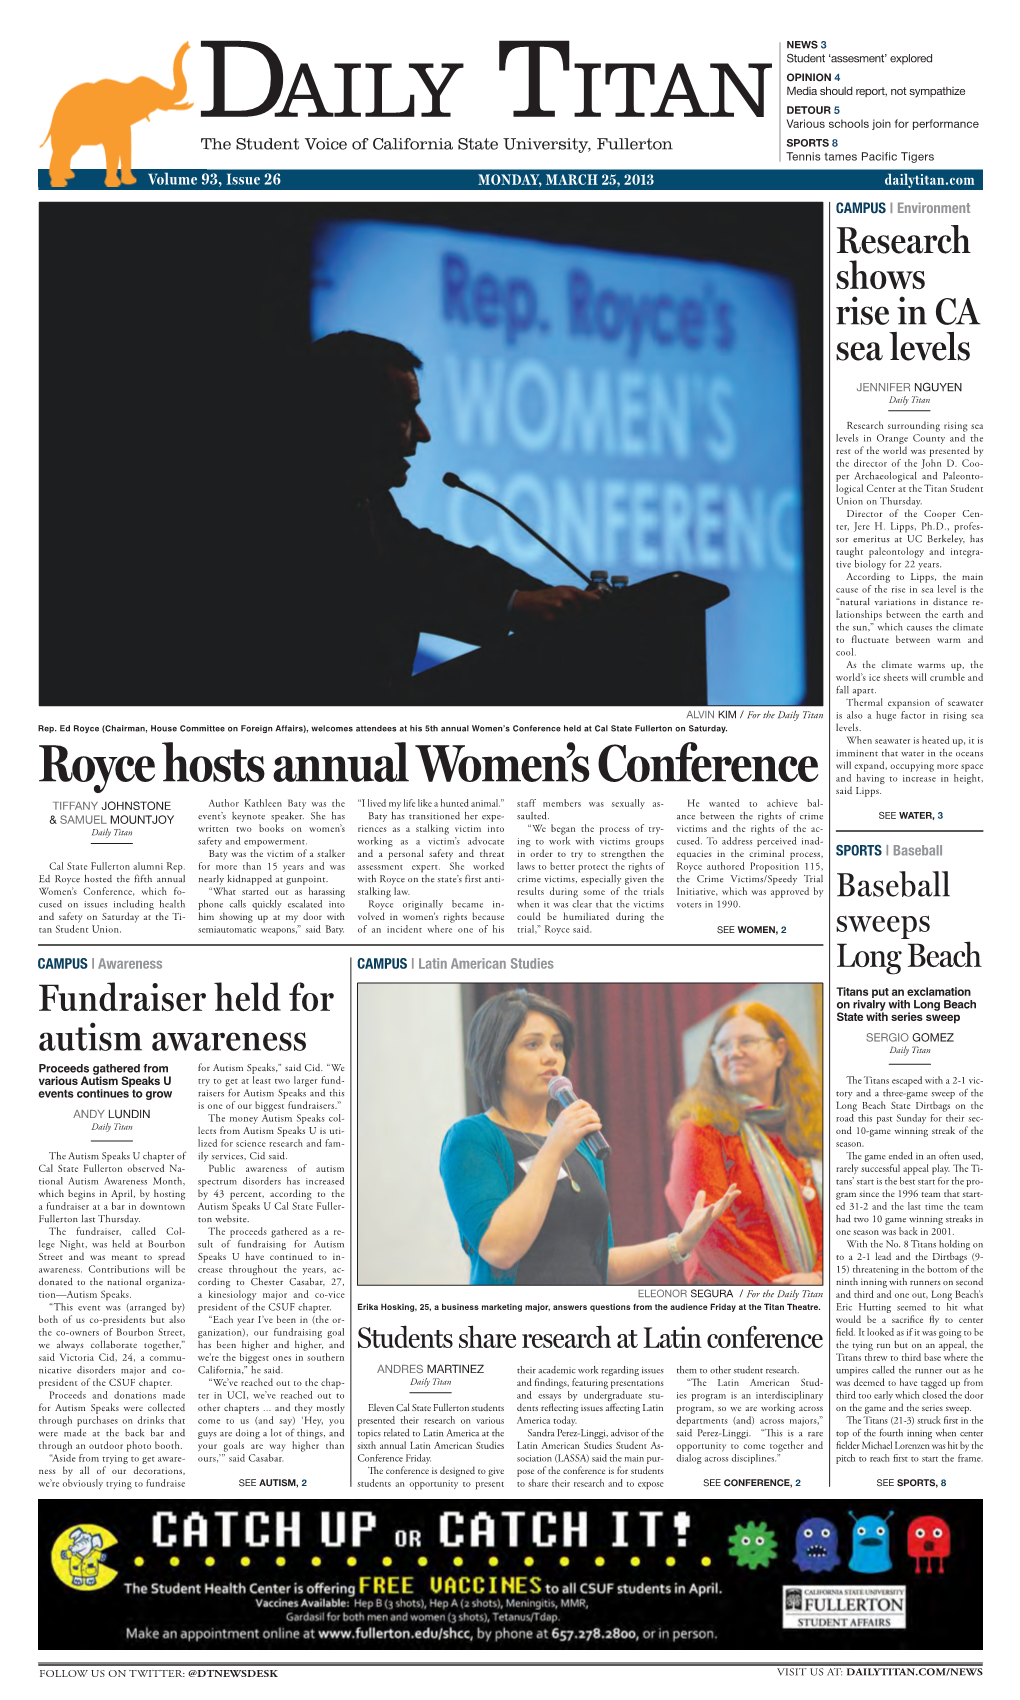 Royce Hosts Annual Women's Conference